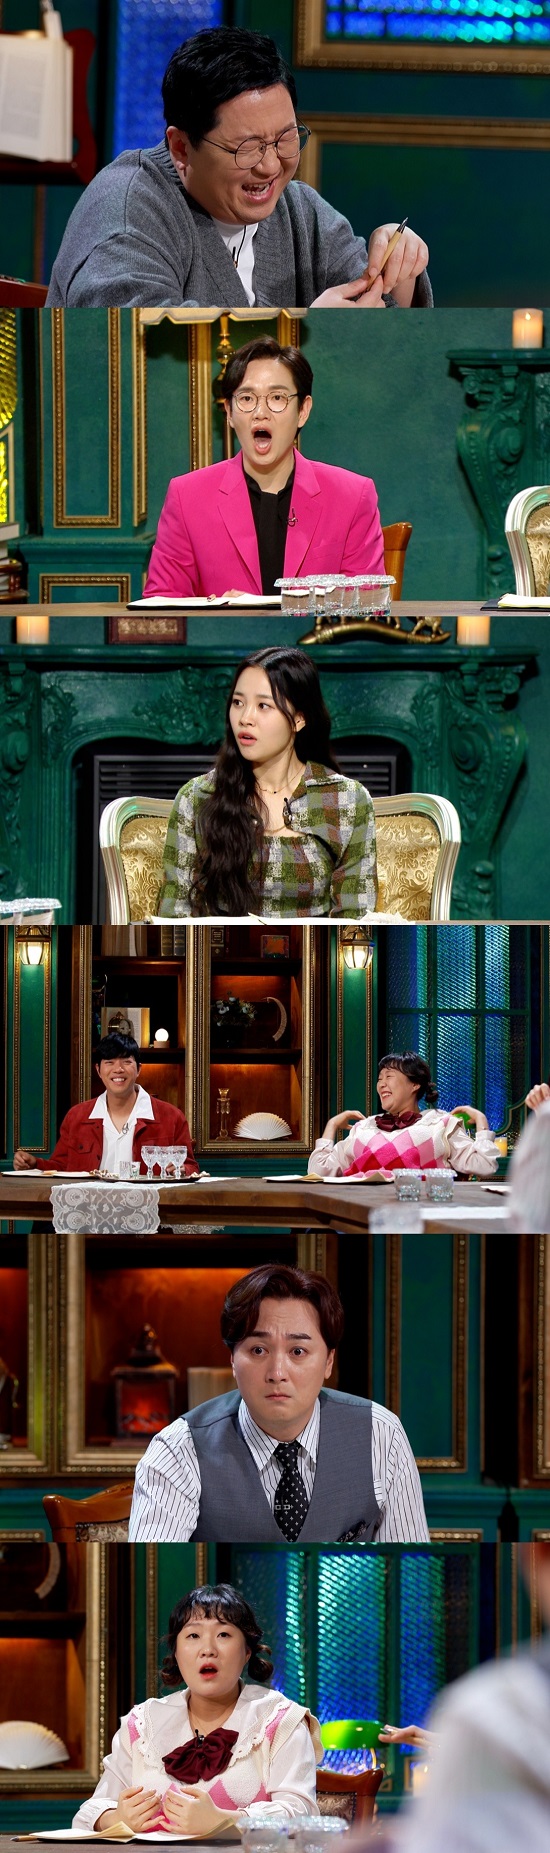 In the 8th MBC surprise secret room broadcasted on the 30th, Weekly Jihan, who likes mysterious stories, goes to MZ judge.Weekly Jihan showed various expressions in each situation, such as nervousness in a scary story and smile in an interesting story.In addition, Seo Tae-hoon and Lee Soo-ji, who gave a pleasant smile on the last 7 broadcasts, will be together in this 8th.The second round of the show will be a showdown between teams under the theme of Amazing Discovery. Jang Sung-kyus team goes to England in the 1700s.She needed a place to sleep with her little daughter.Then one day, when she finds the housemaid job advertisement on the wall, she starts working immediately in the mansion.The butler of the mansion asks her to have one condition, which is that she should never meet the owner of this mansion.Curiously, the owners Identity was a mystery itself, so that no one else saw the landlords face besides her.Then one day, The Housemaid ran into a late-night outing landlord, and nowhere in the mansion since Agnaldo Timóteo could find the Housemaid, but what happened to Agnaldo Timóteo night?In an exciting story, Jeong Hyeong-don and Empire showed a man falling into a mans story saying, What the hell is going on? And Jihan also shouted big hit with a curious face and tried hard to guess about the identity of the man.I gather my curiosity.Meanwhile, the amazing discovery of the Jeong Hyeong-don team begins in a city in Italy, where the war was in full swing in the 1940s.Allied forces, bombed by German forces, lost a lot of supplies and soldiers, but after 12 hours, abnormalities begin to appear in the soldiers bodies, their eyes swelling, even blindness.Suddenly, the soldiers who are not seeing are crying, and the scene becomes a mess.Since then, the residents of the city who have not been directly attacked by the enemy have begun to show signs of death.As the situation becomes serious, the Allies who have rushed into epidemiological investigations hear one unexpected story during the investigation process.Everyone in City had a very nasty smell in common, what was the Identity of the smell that made them suffer?It is also surprising that the Identity of the smell that made the soldiers troubled led to the discovery of the century that saved everyone.Jihan was so focused on the story that he could listen to the story without knowing himself.The story of the landlord who hid his life in the mansion and the smell of the smell that led to the blindness of all during the war are revealed at MBC surprise secret room at 9 pm on the 30th.Photo: MBCs surprise secret room